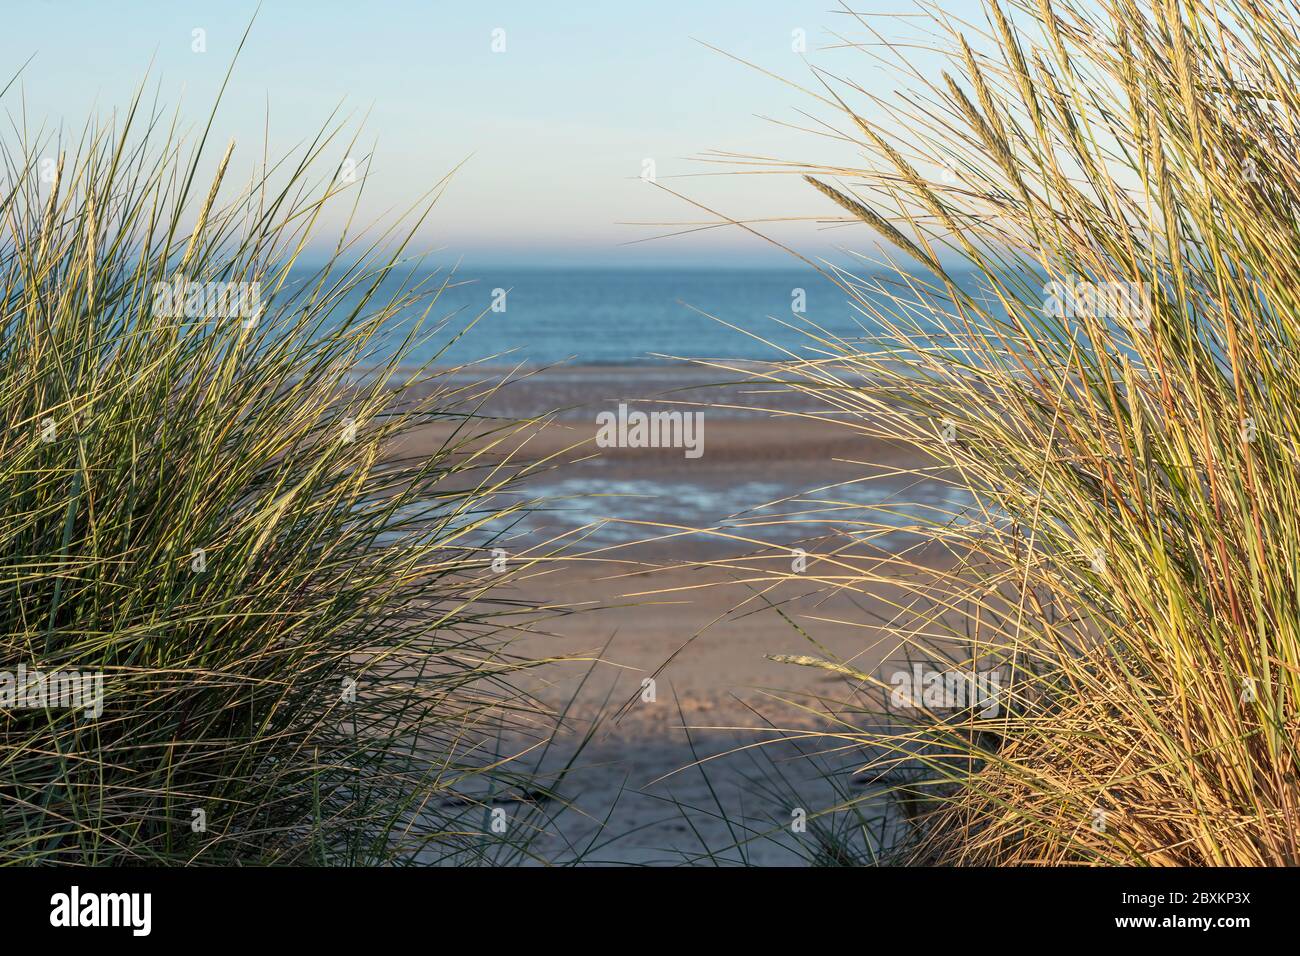 Beach scene at sunset looking though mounds of sea grass Stock Photo